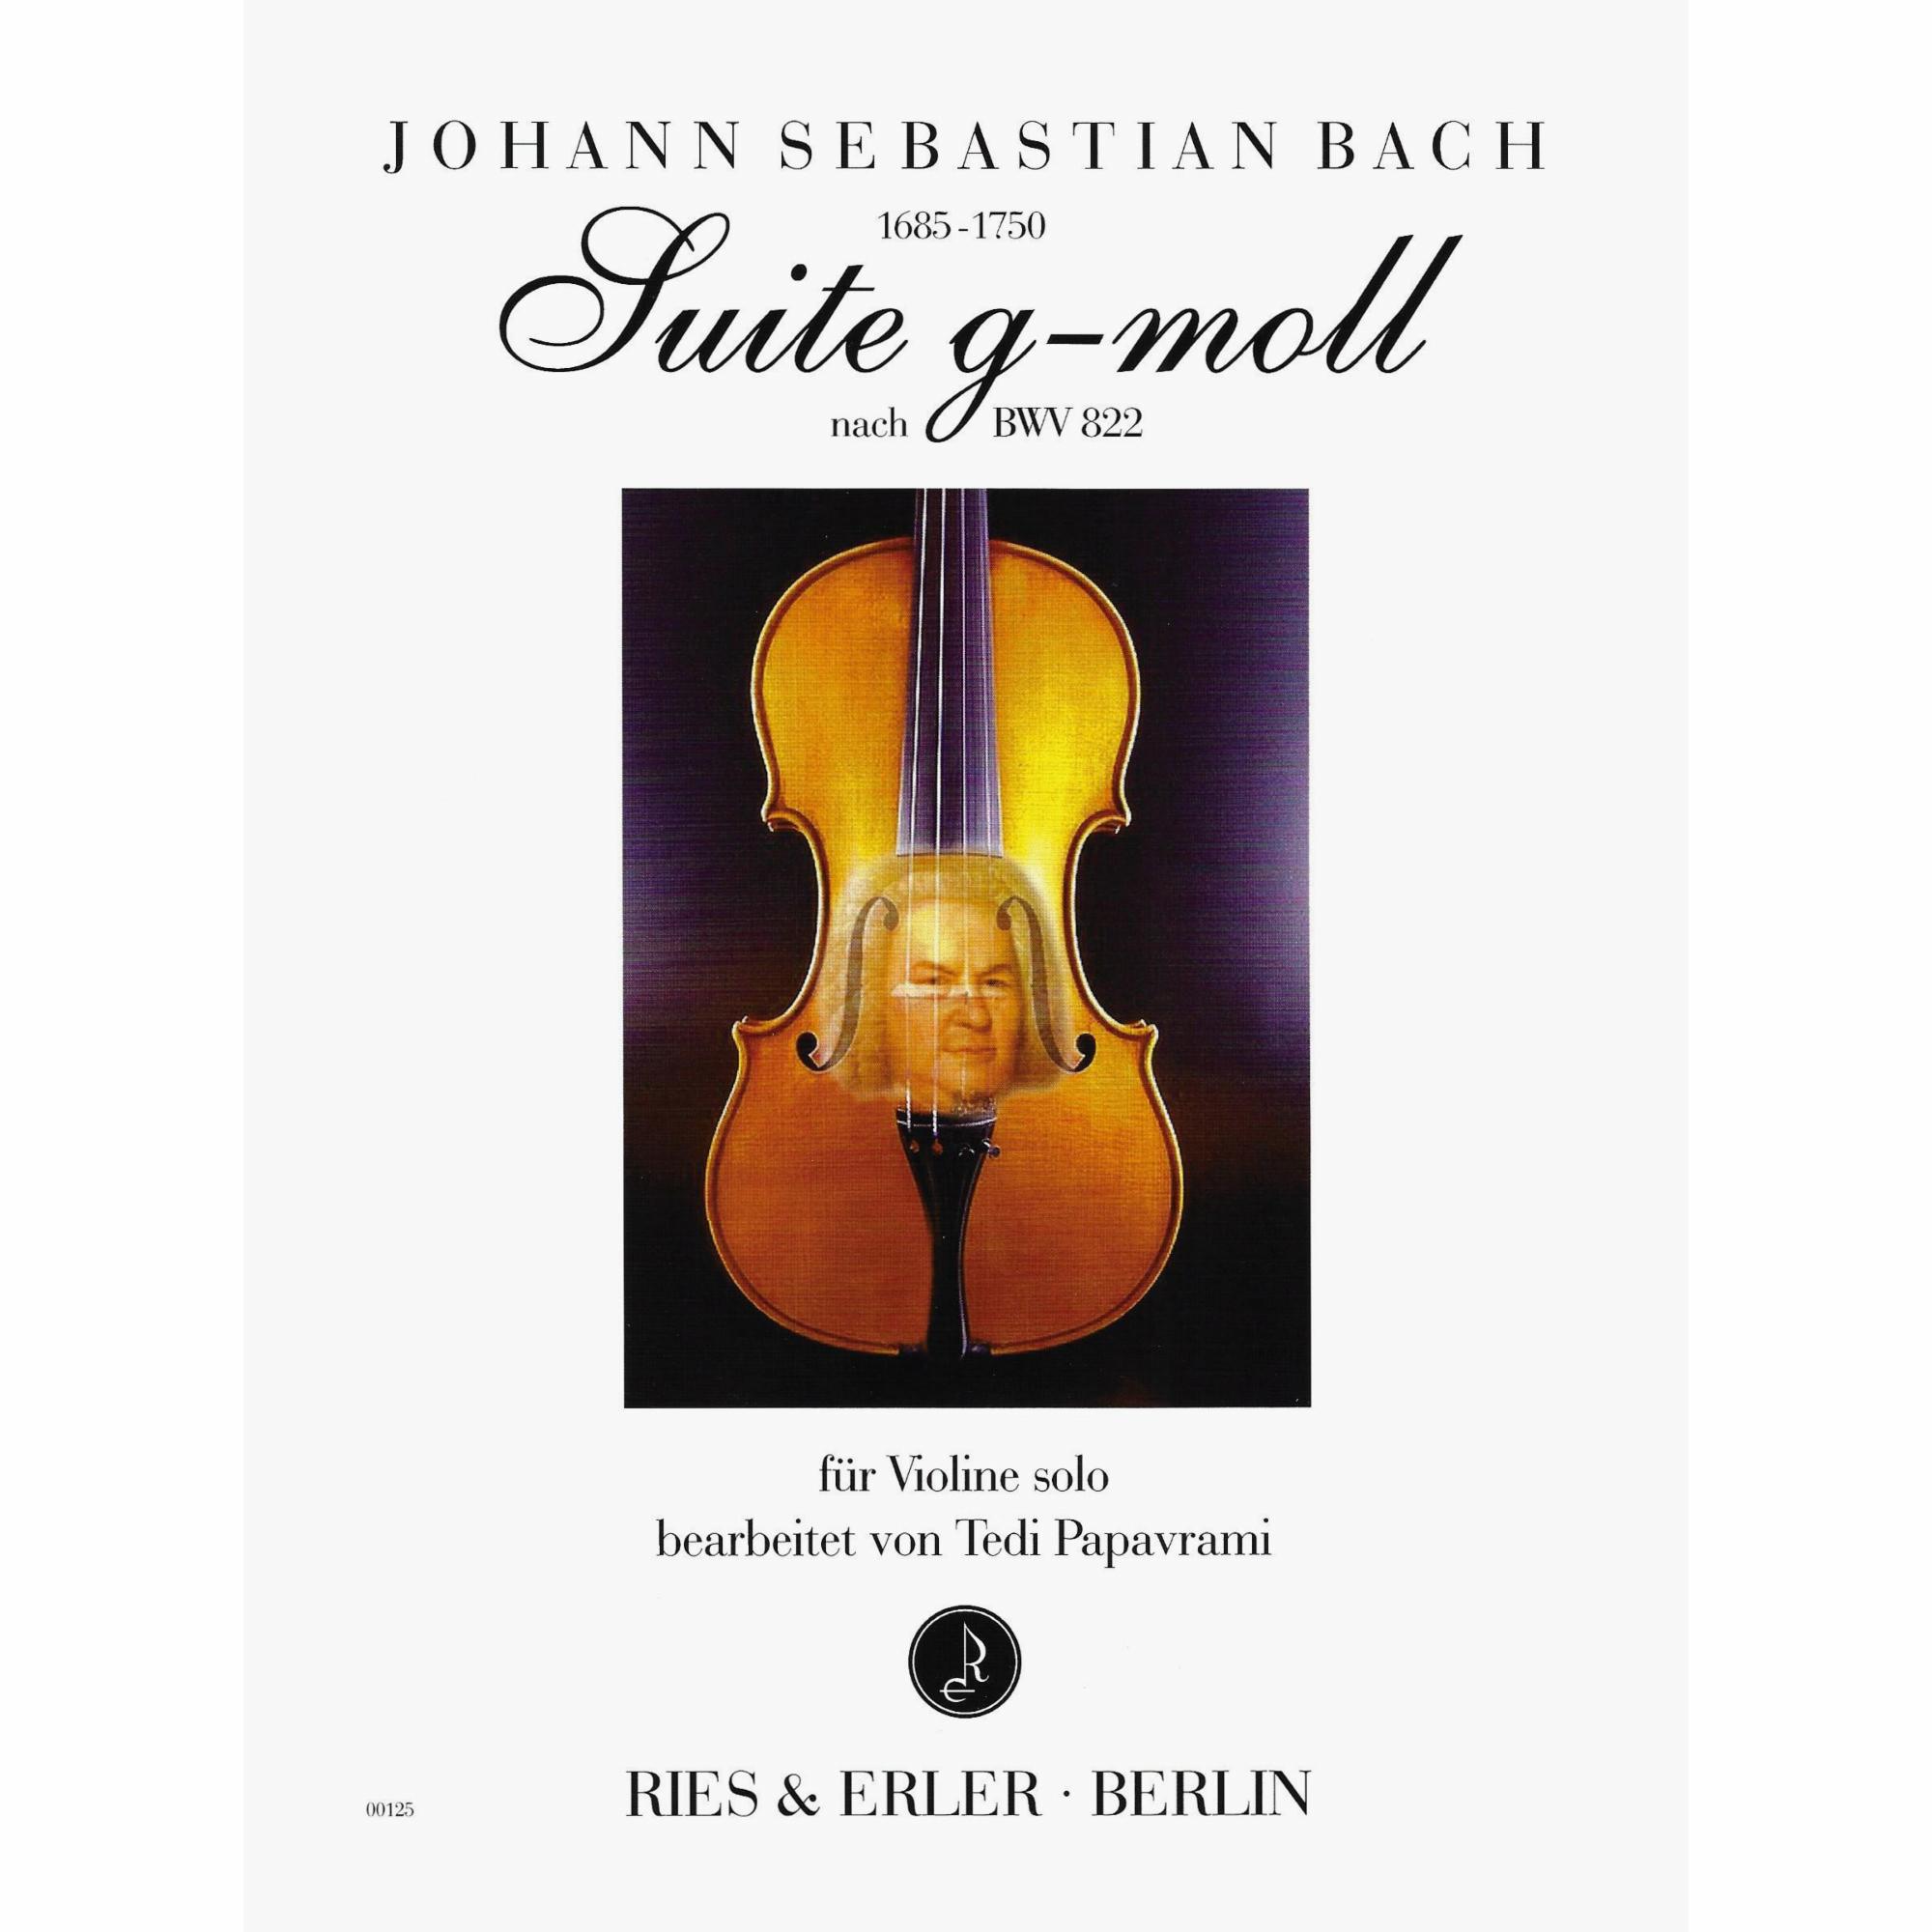 Bach -- Suite in G Minor, after BWV 822 for Solo Violin